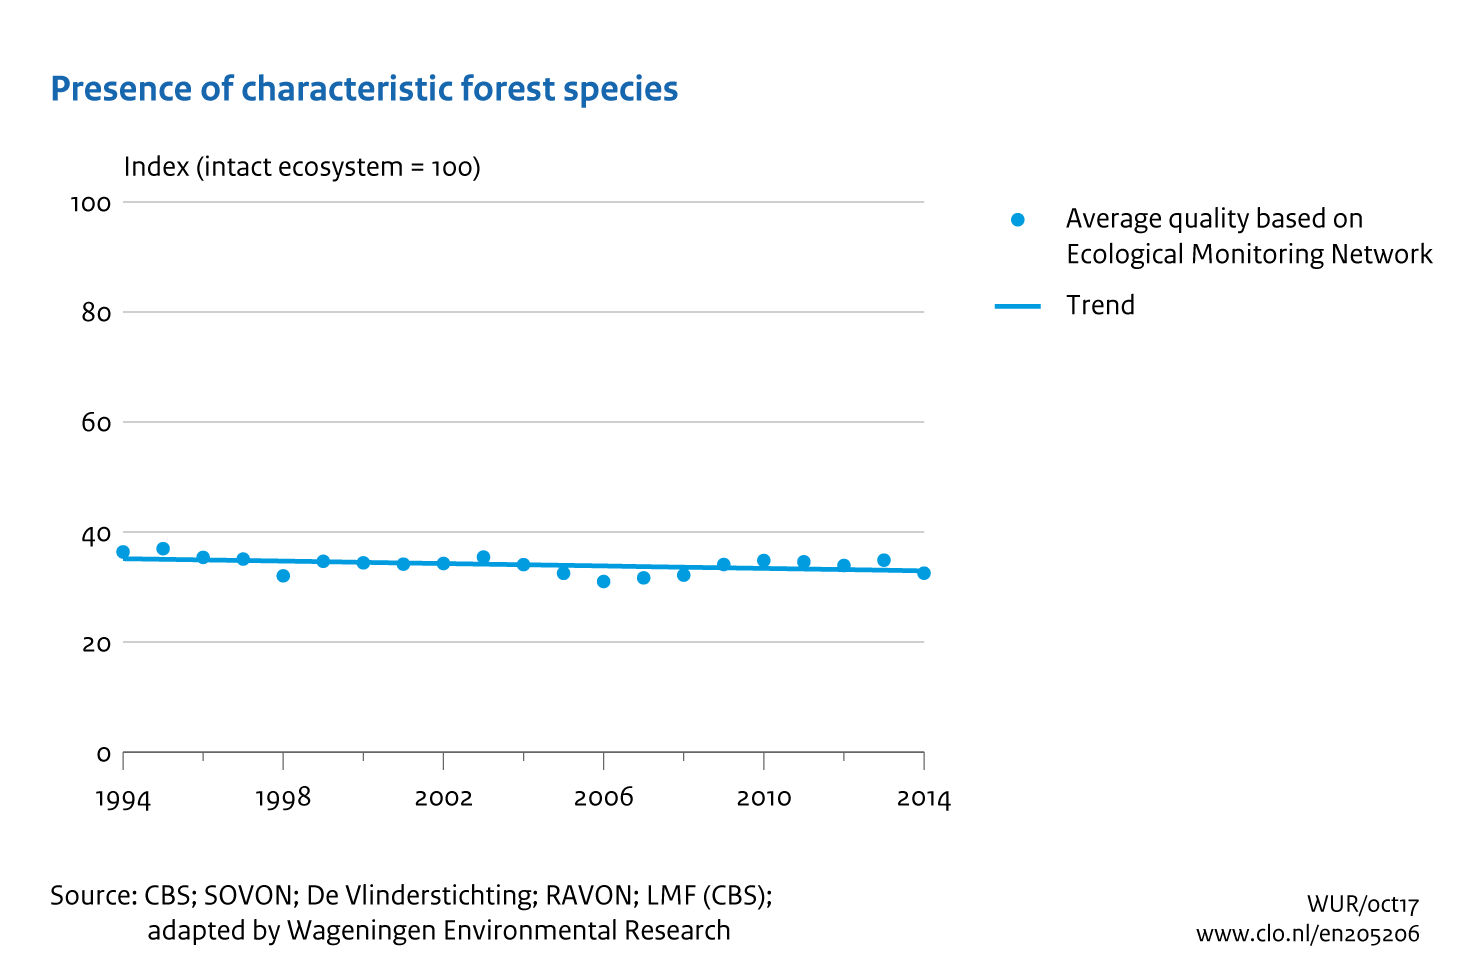 Image Presence of characteristic forest species. The image is further explained in the text.